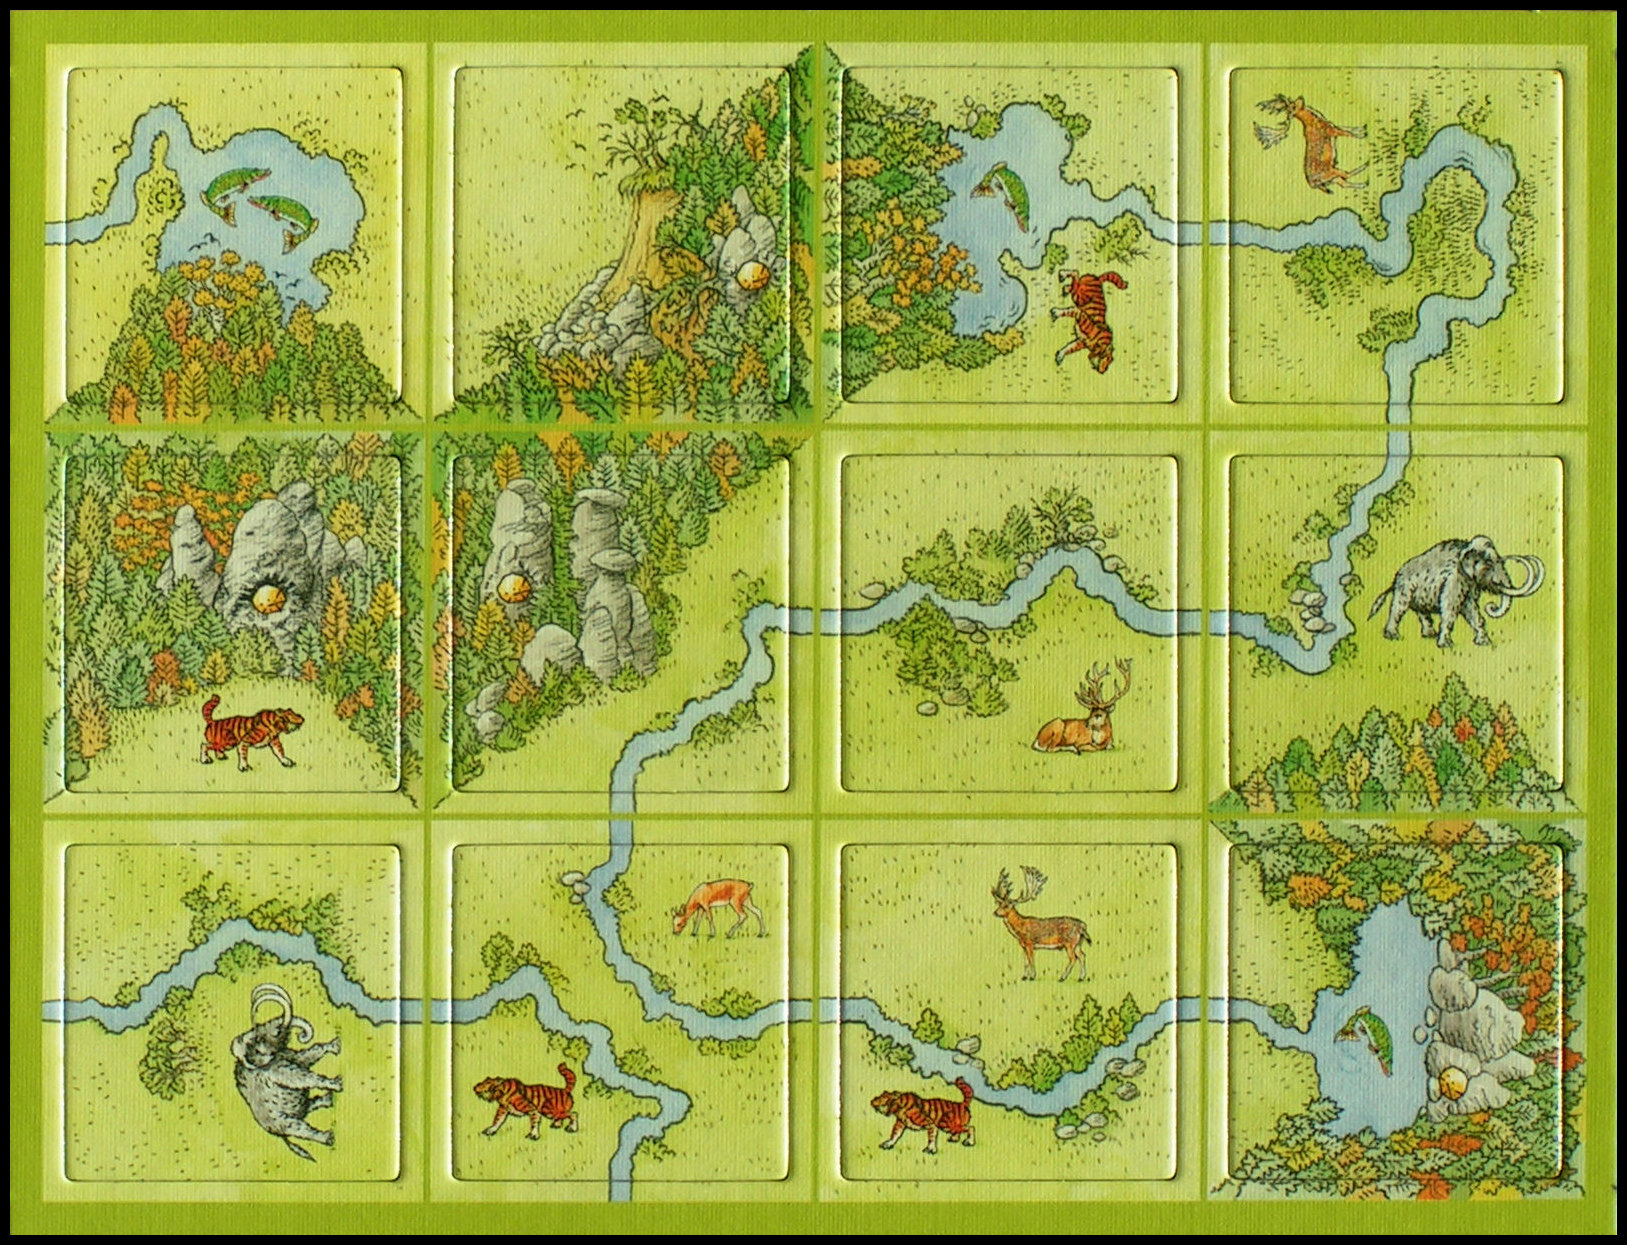 Carcassonne: Hunters And Gatherers - Tileset Showing Continuity Of Artwork